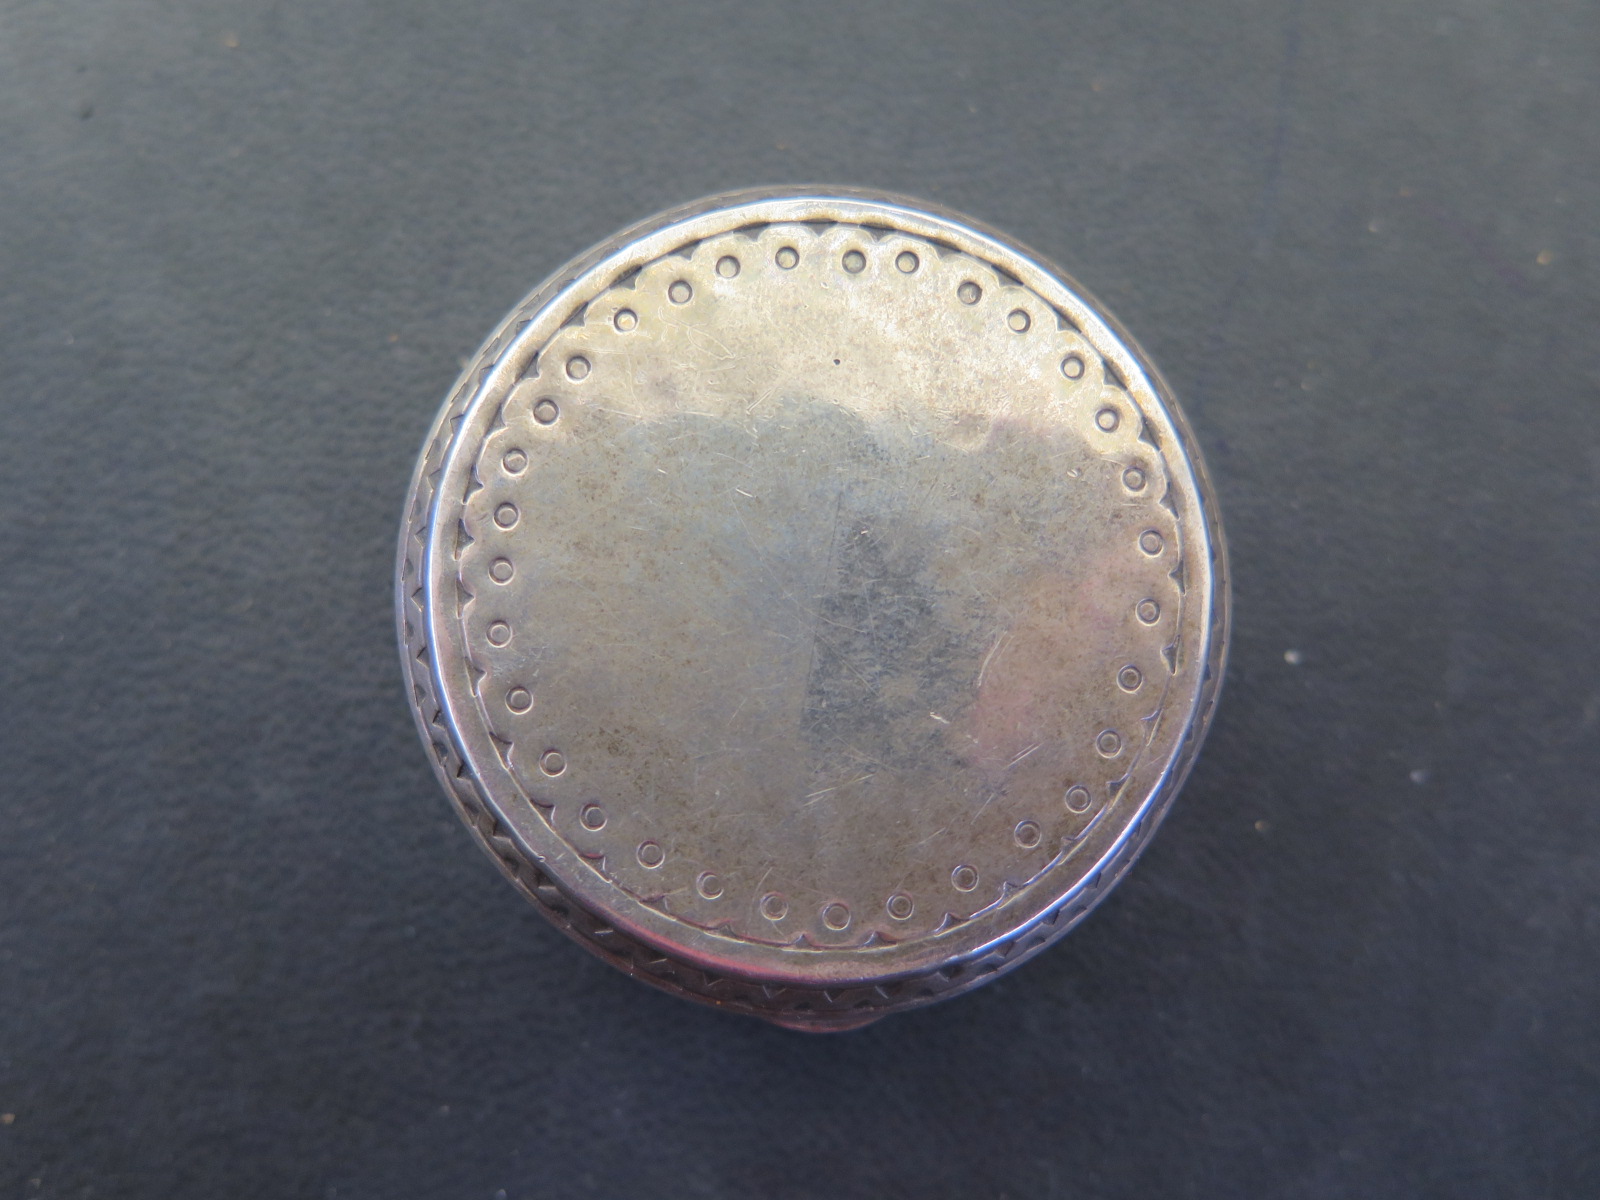 A silver Liberty pill box - Diameter 5cm - approx weight 1 troy ox, 31.